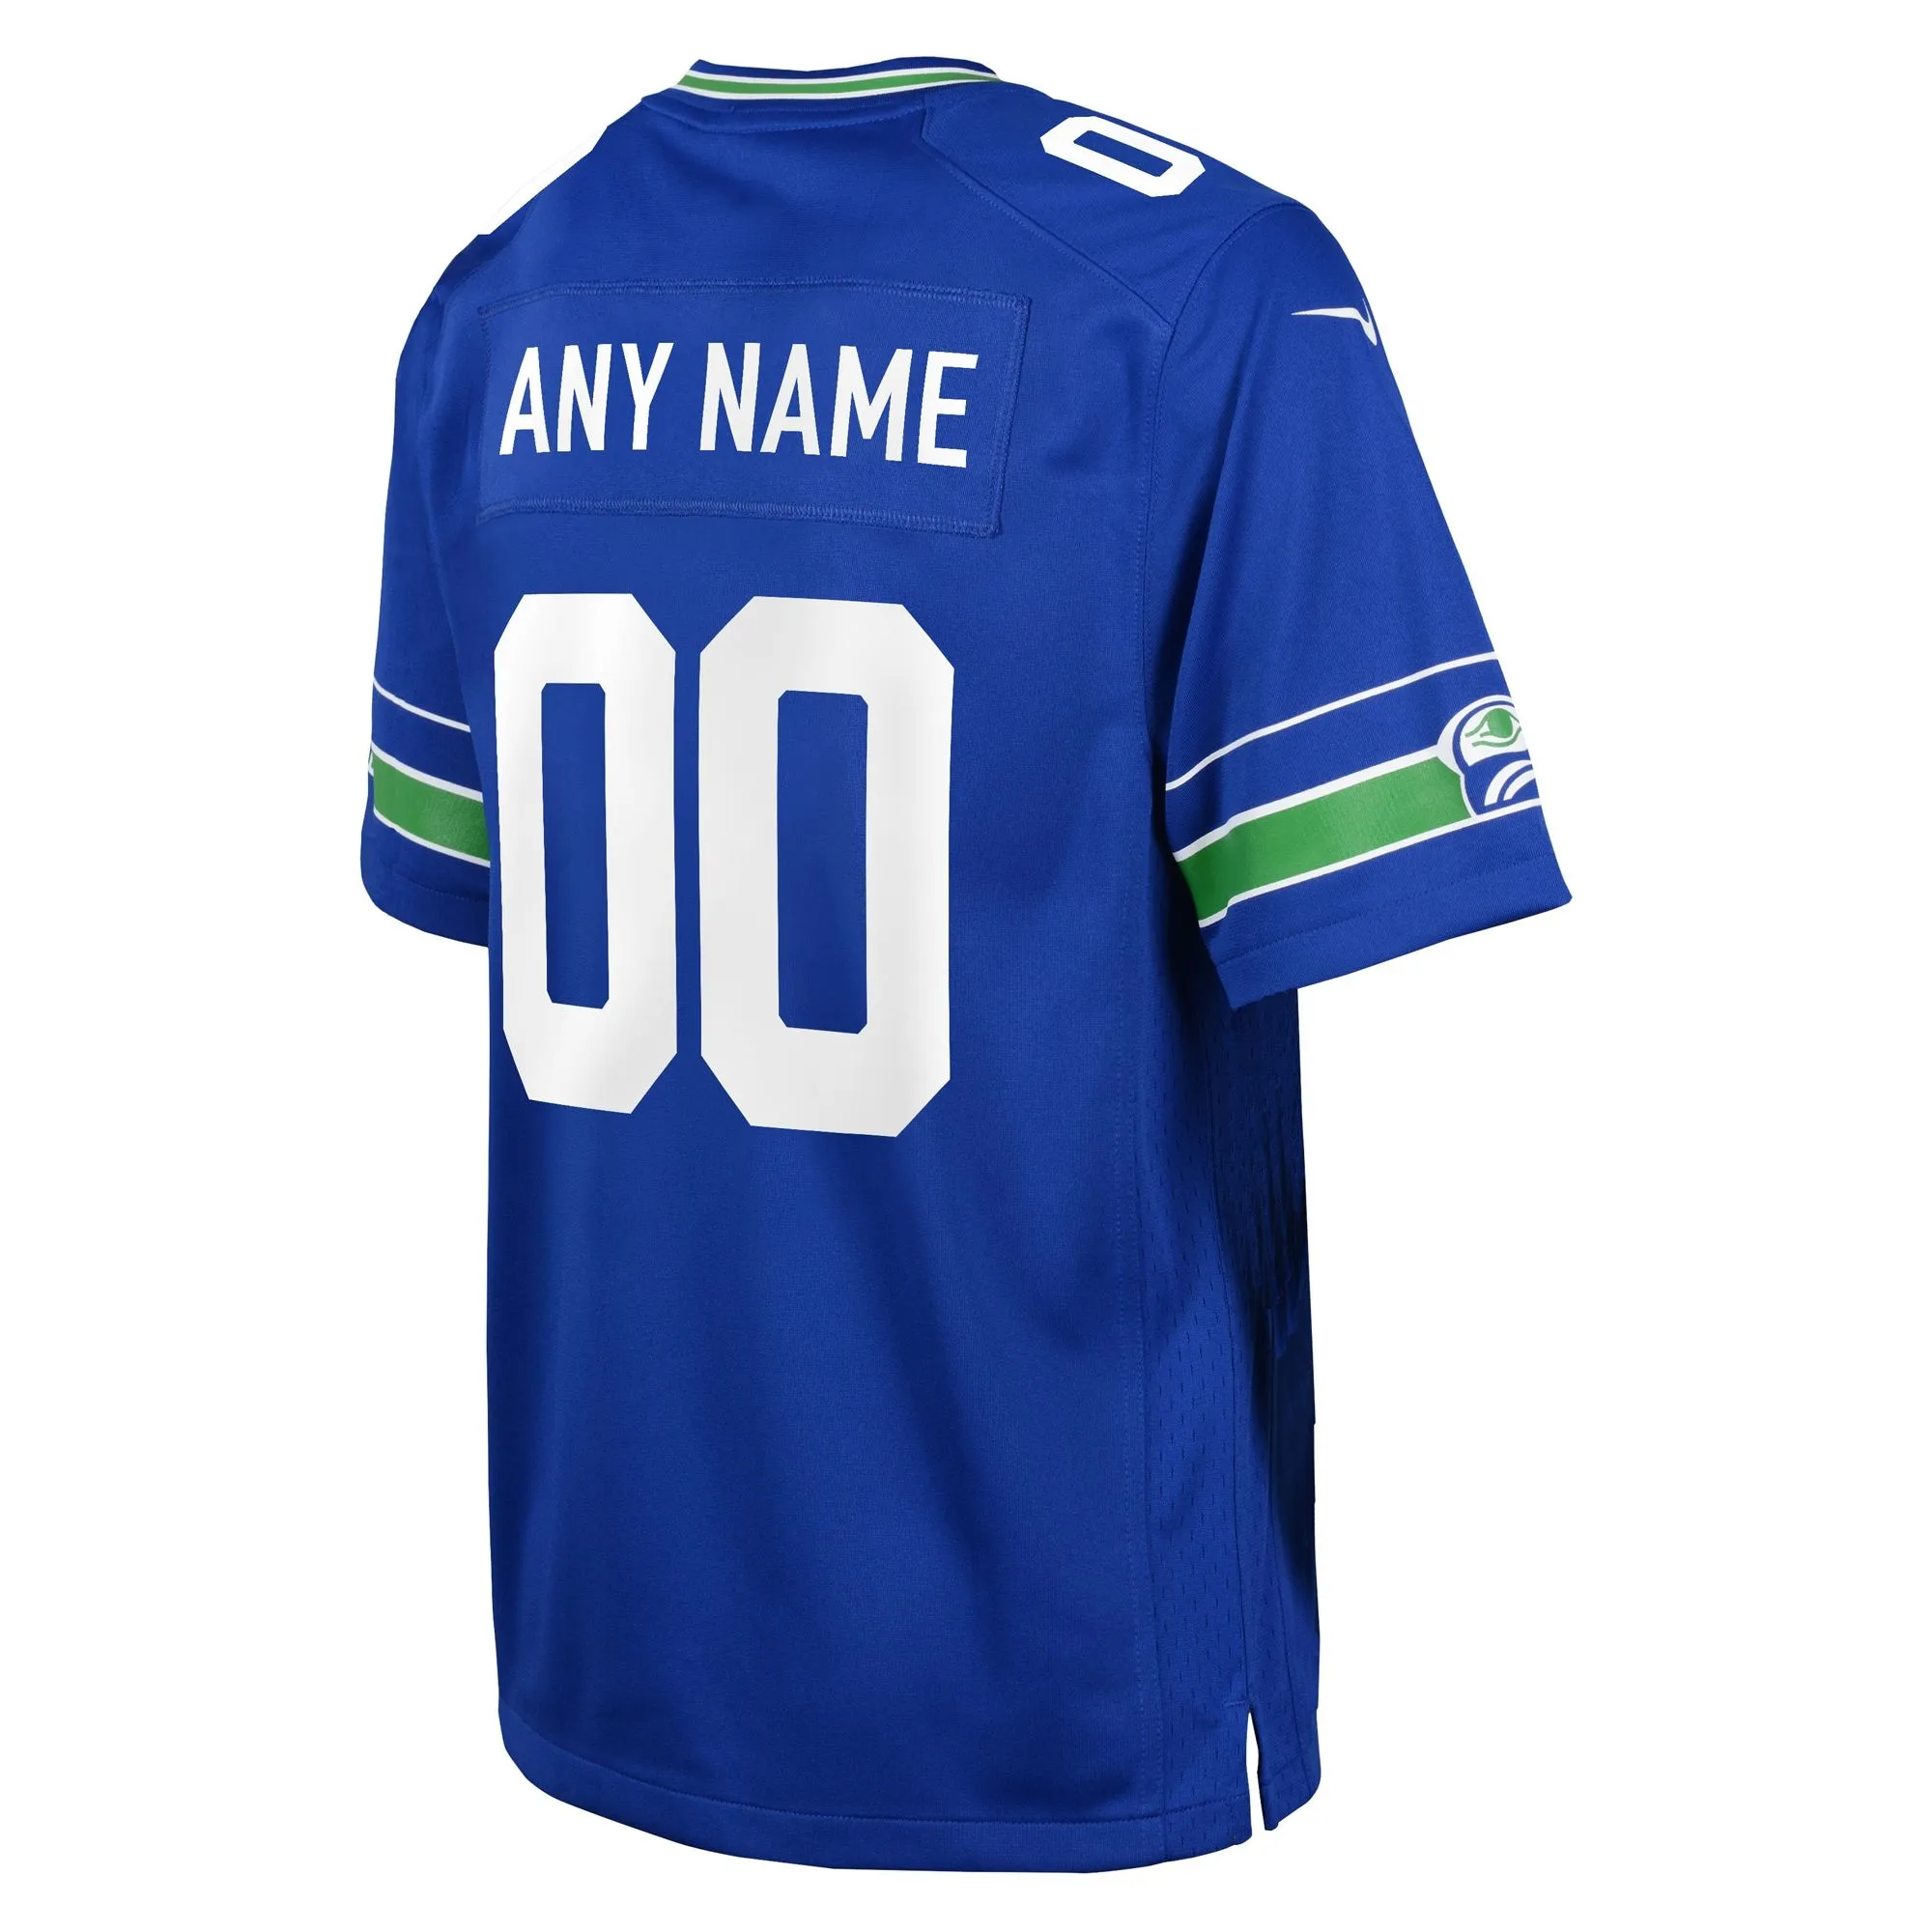 Seattle Seahawks  Youth Throwback Custom Jersey - Royal